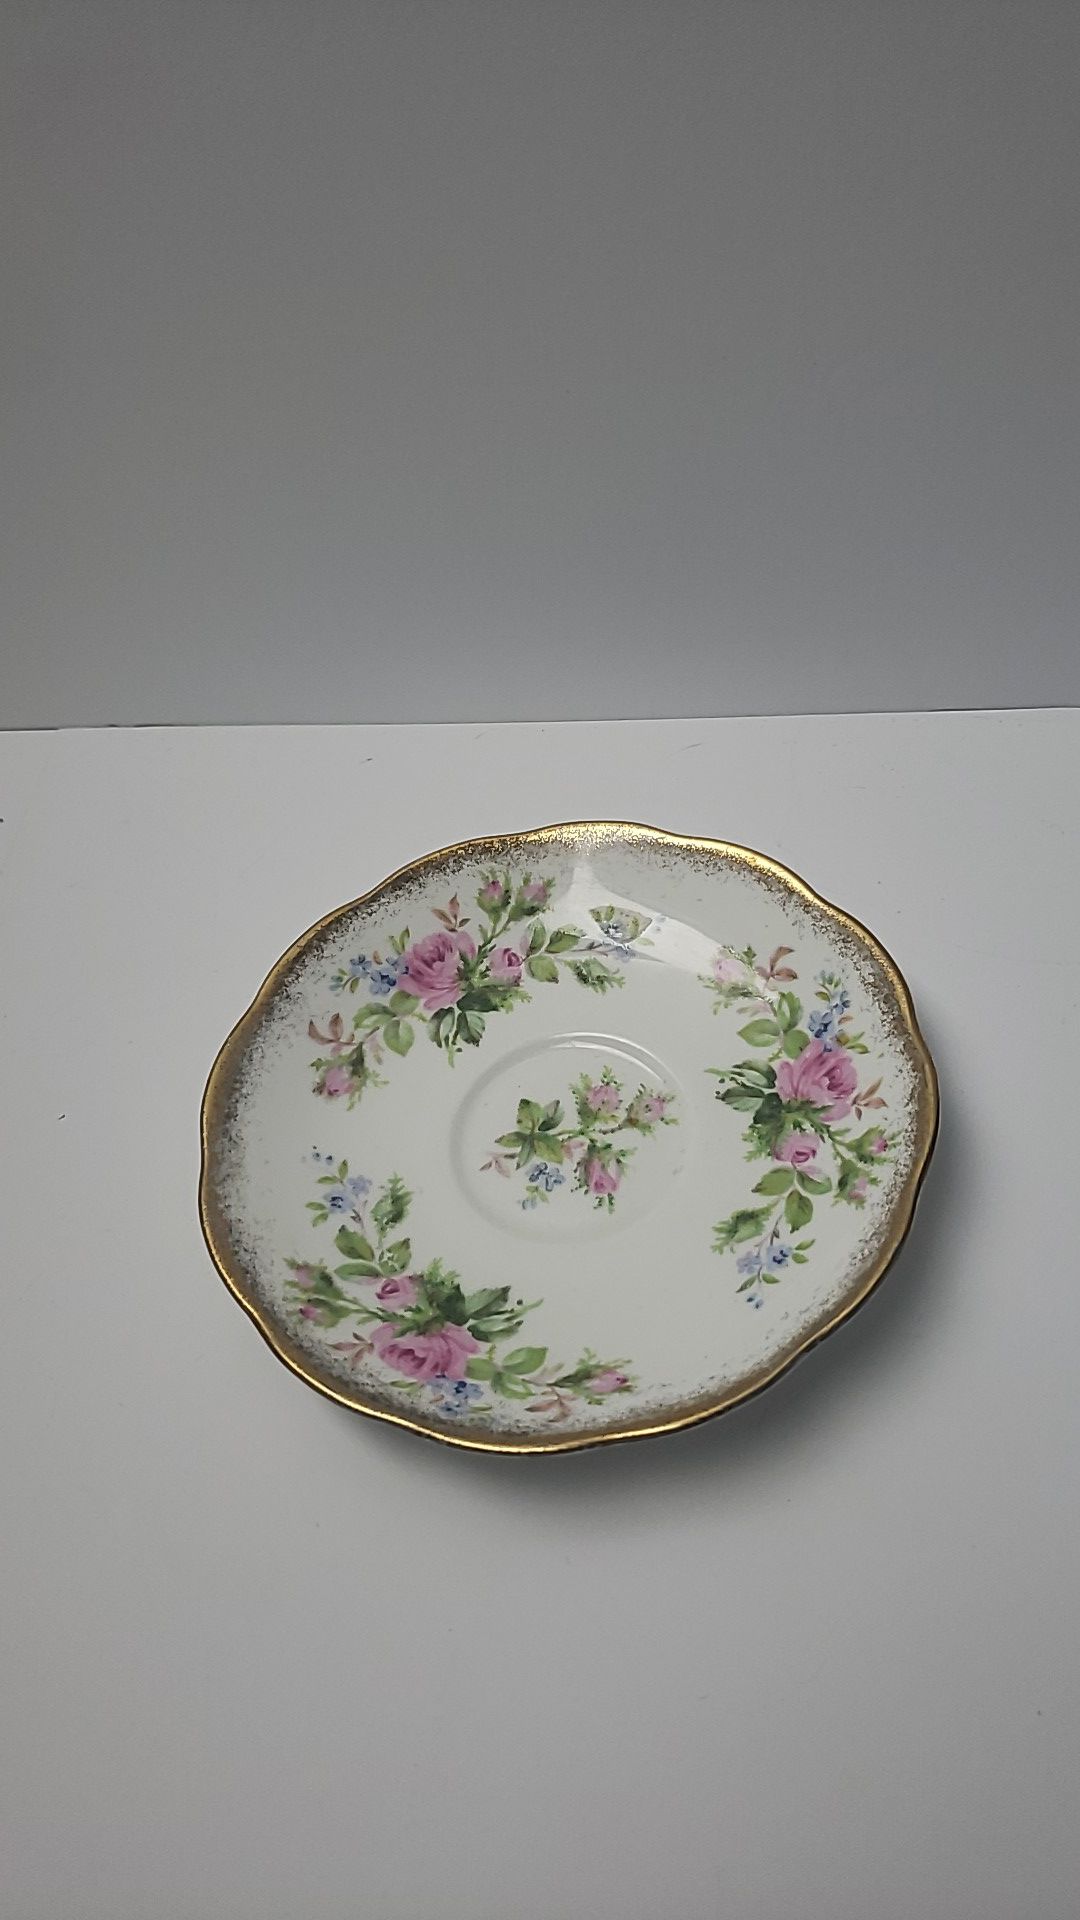 Vintage small plate